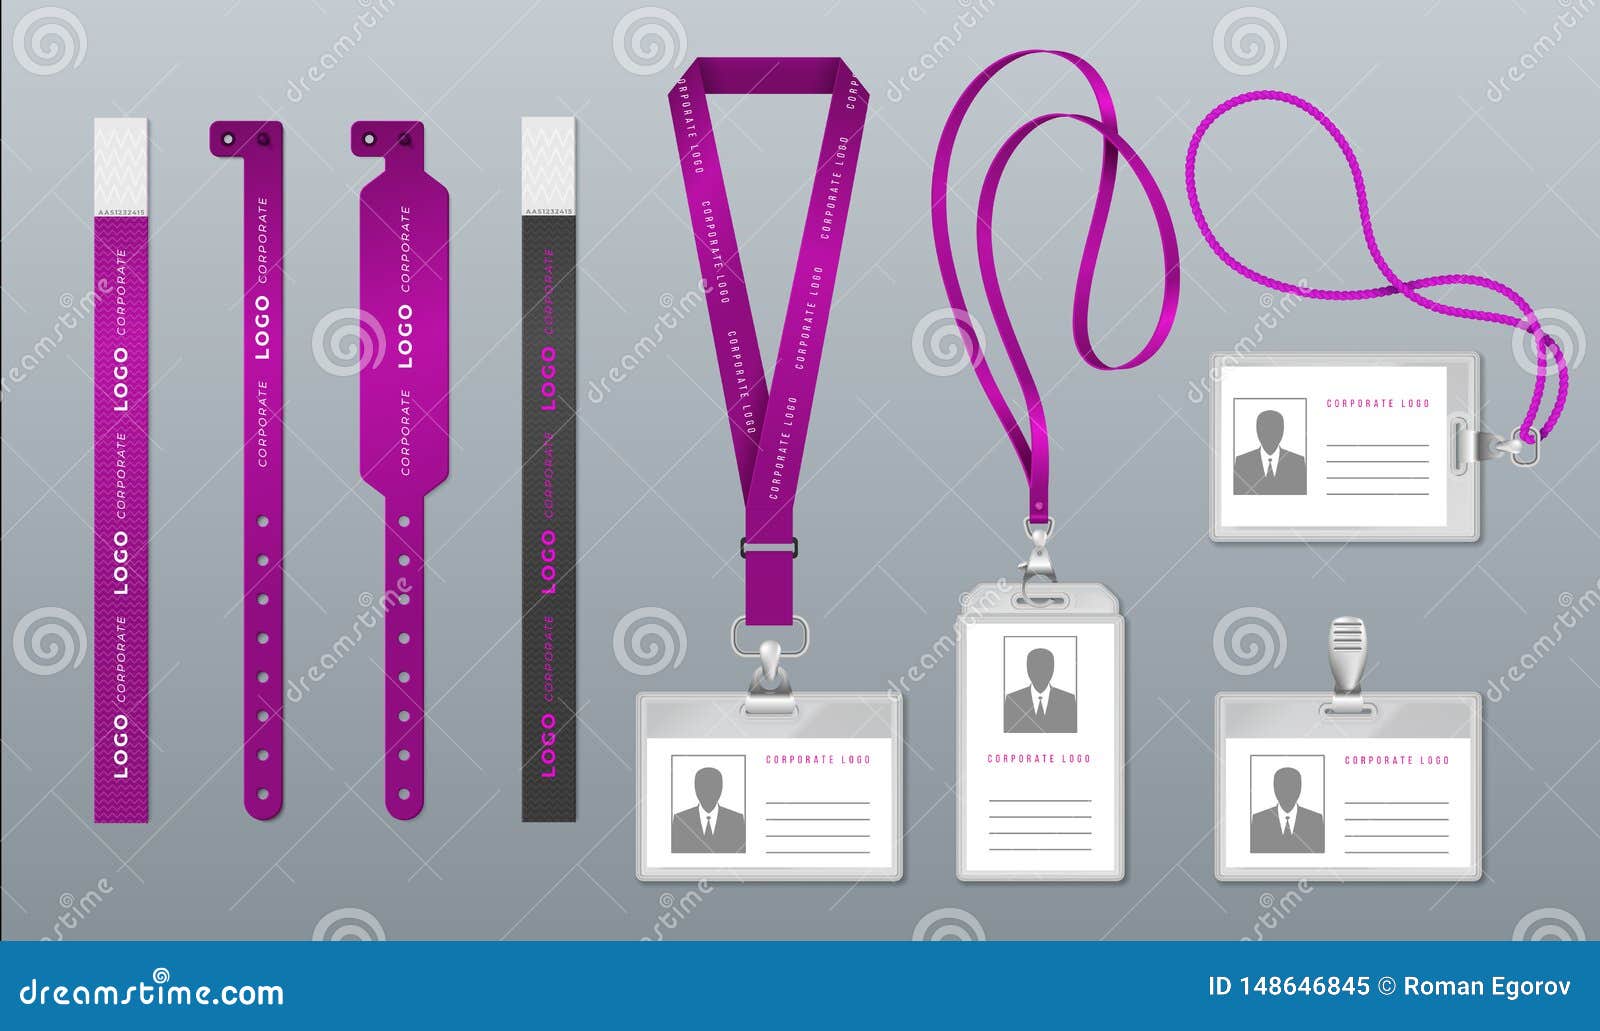 Download Realistic Lanyard Badge Identity Card Mockup Event And Festival Ribbon Access Pass Accreditation Id Vector Card Stock Vector Illustration Of Festival Mockup 148646845